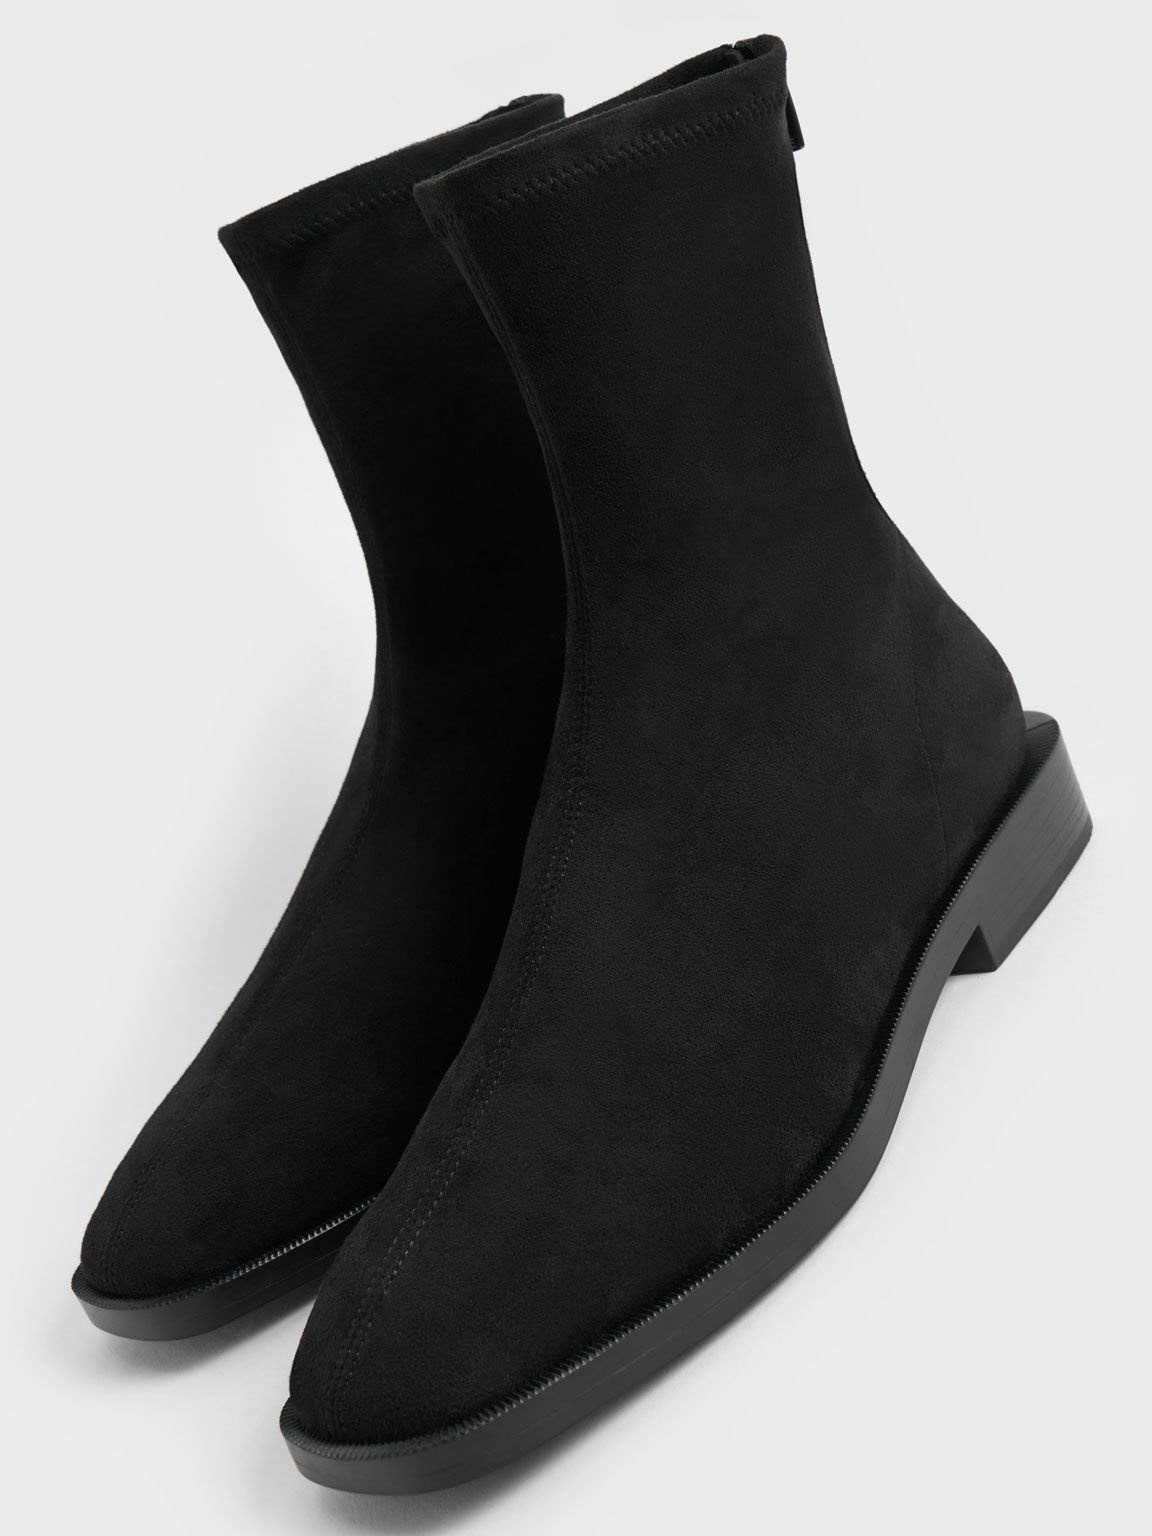 Square Toe Zip-Up Ankle Boots, Black Textured, hi-res